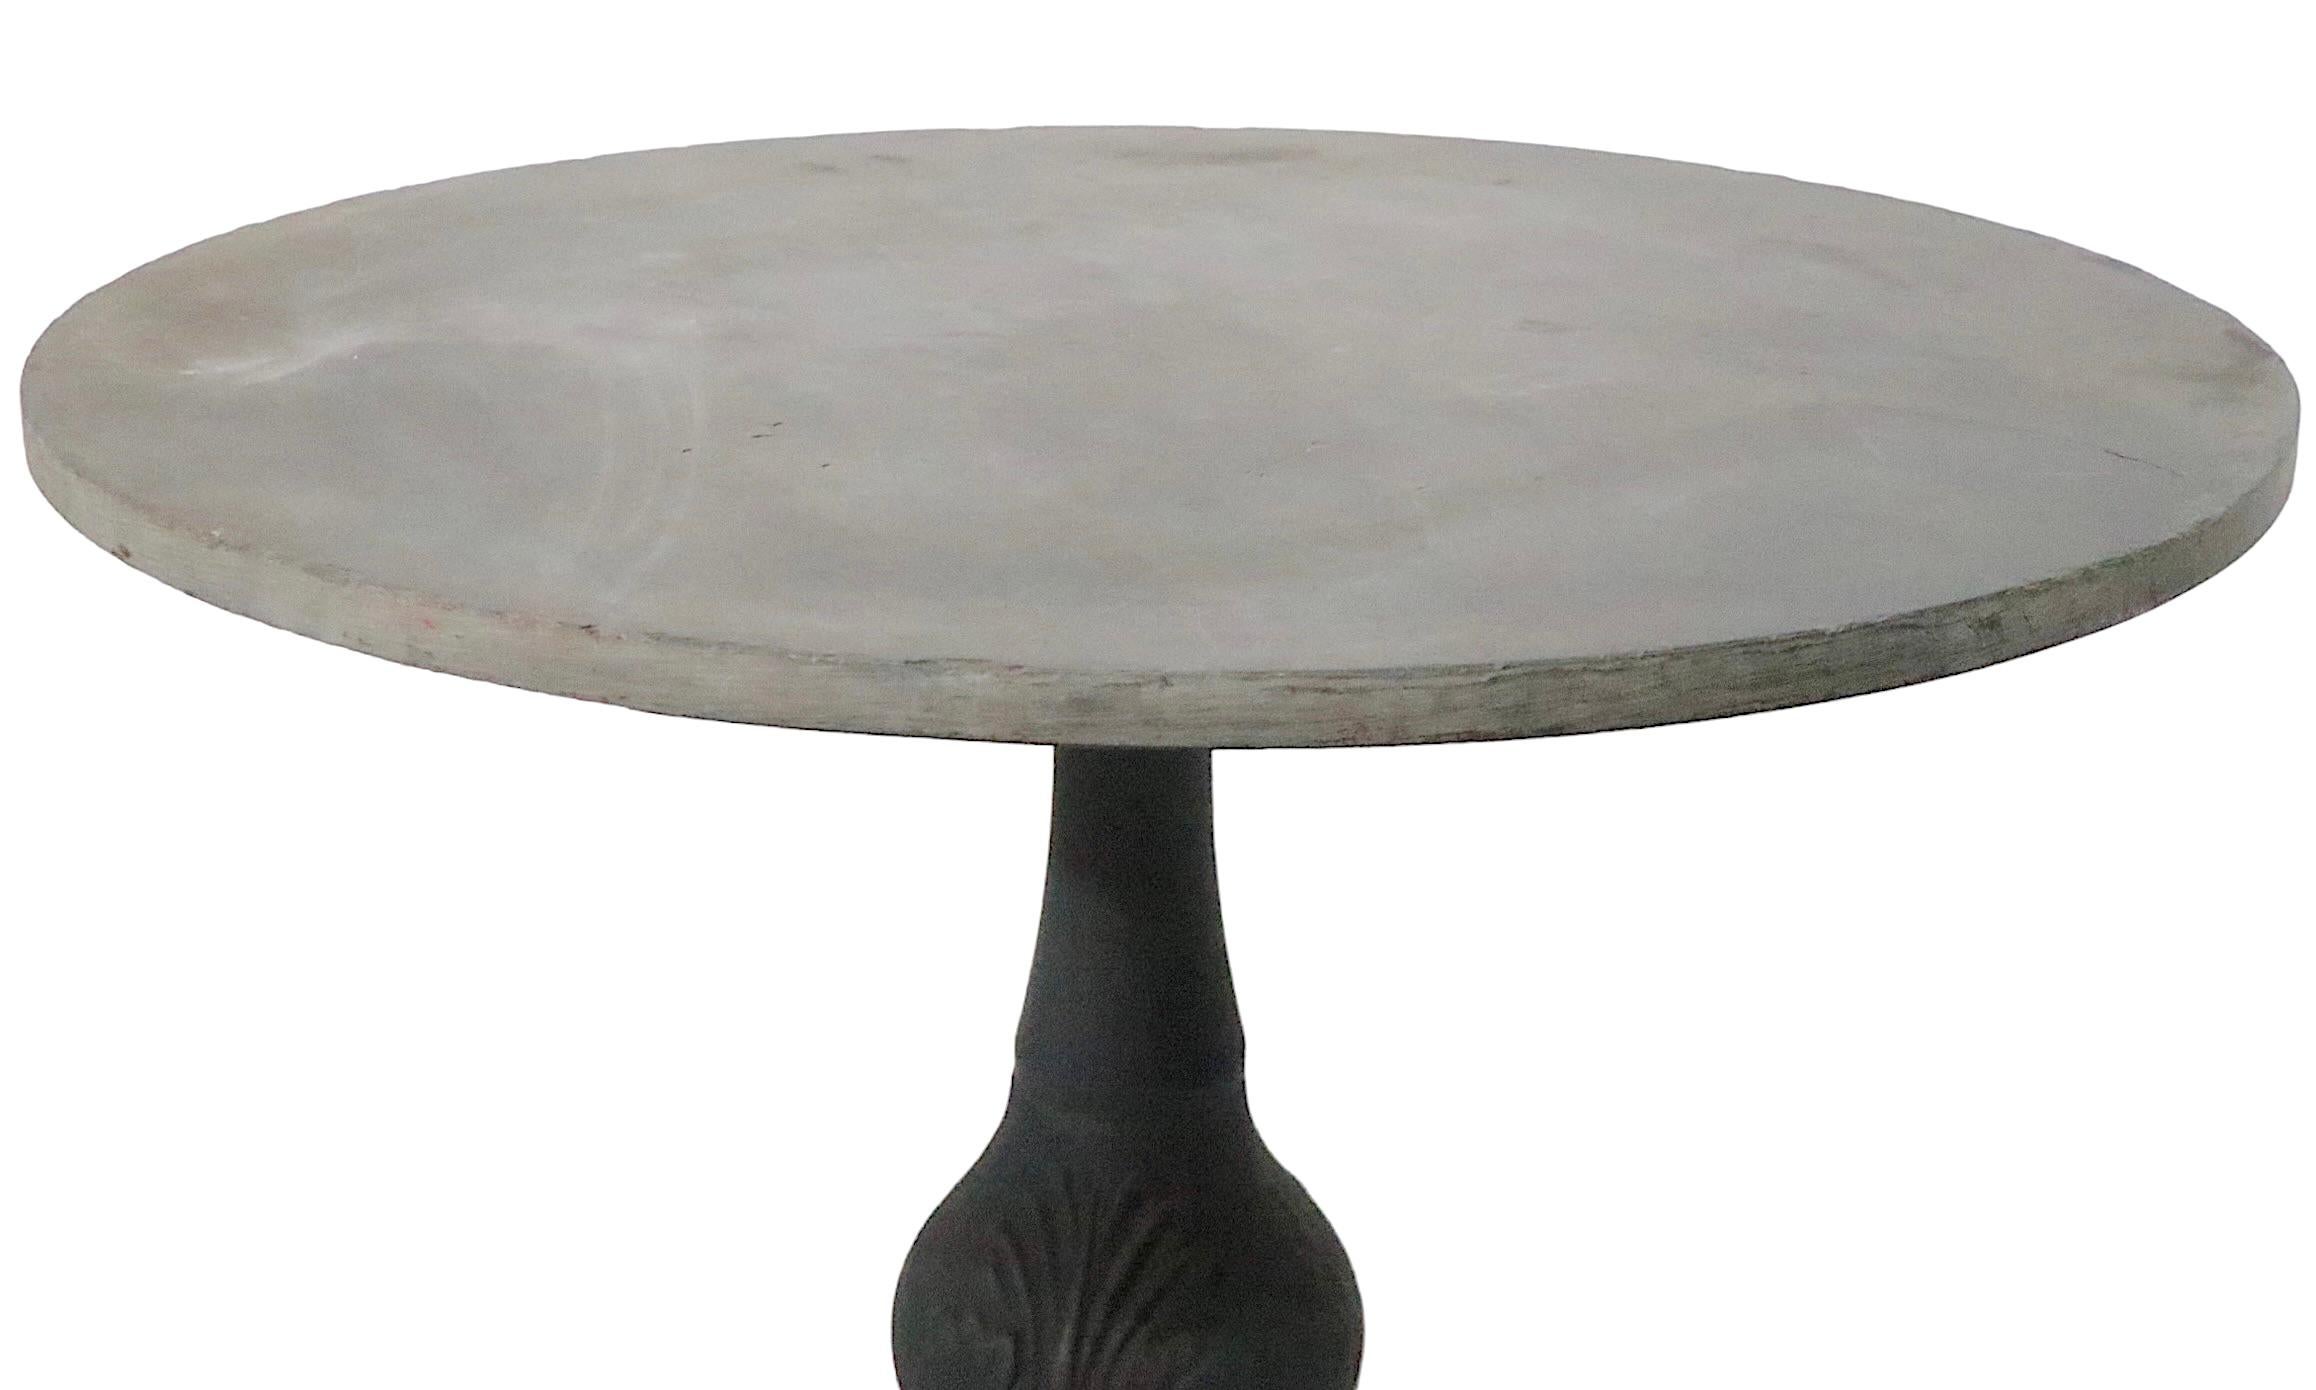 Granite Top Cast Iron Base French Style Cafe Bistro Garden Table c 1920 - 1950s For Sale 3